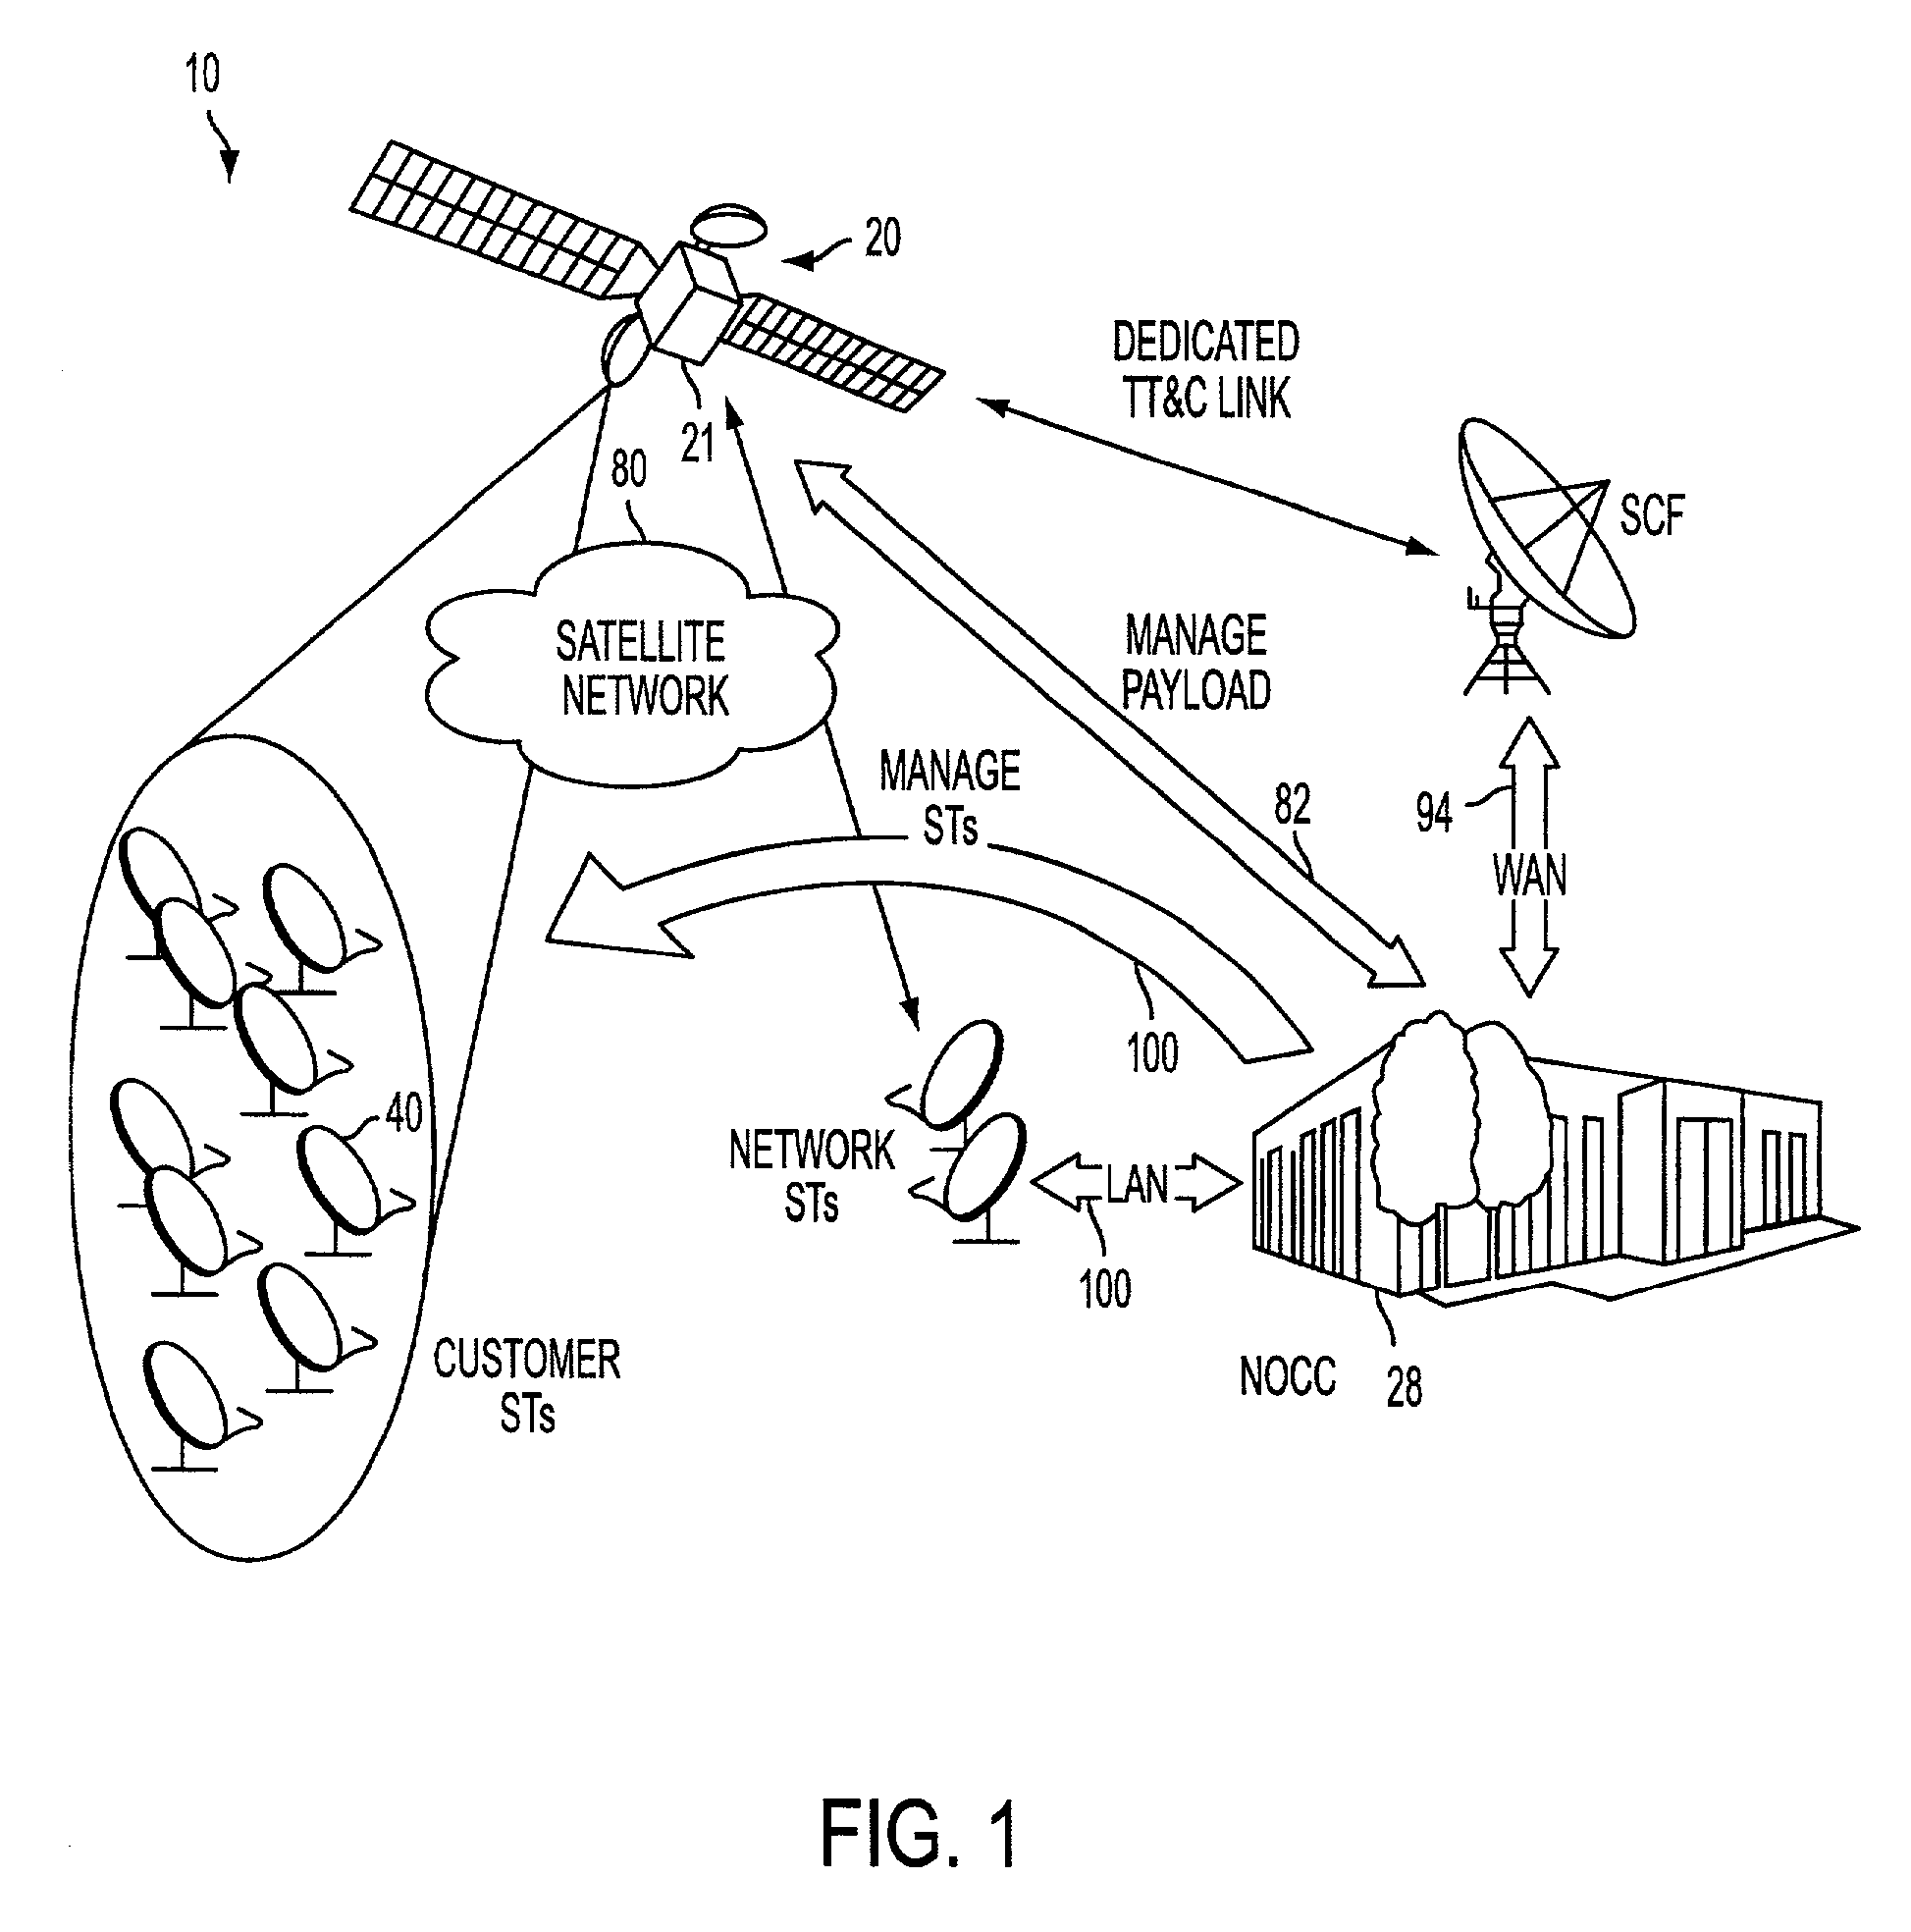 Uplink power control system for satellite communication system employing on-board satellite processing and fade estimation